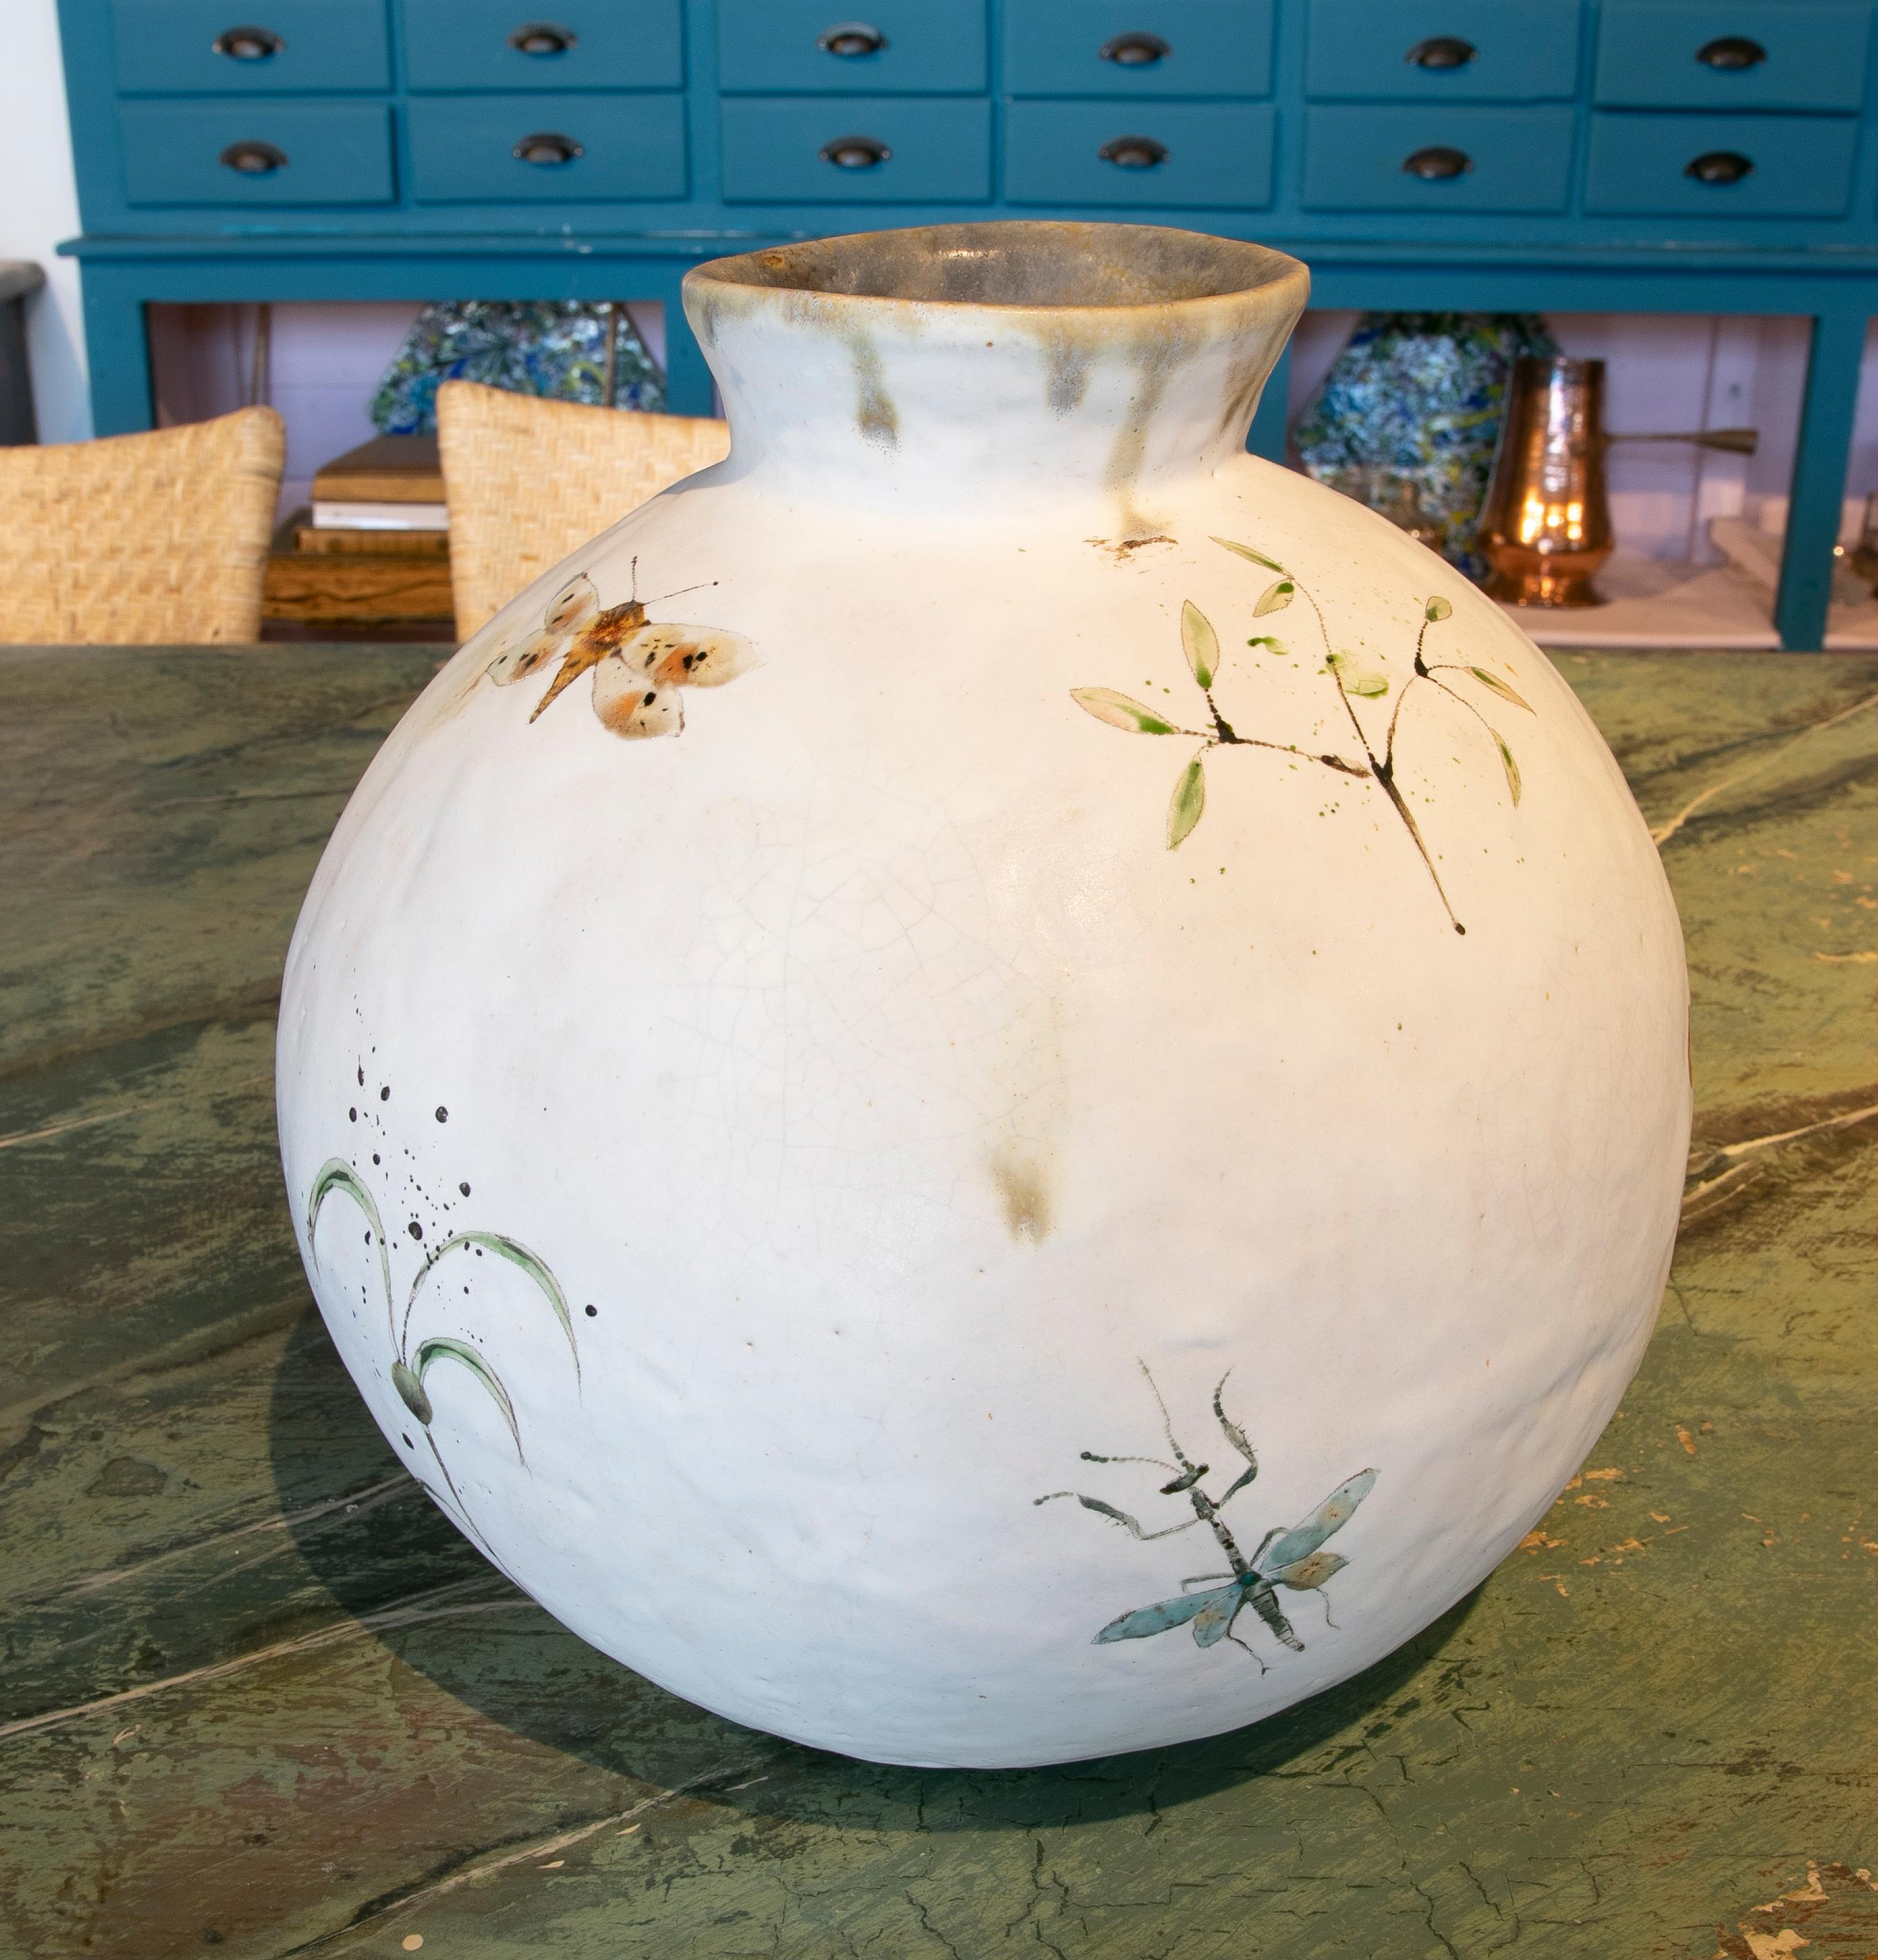 Spanish Round-Shaped Vase in Hand-Painted Ceramic with Insects